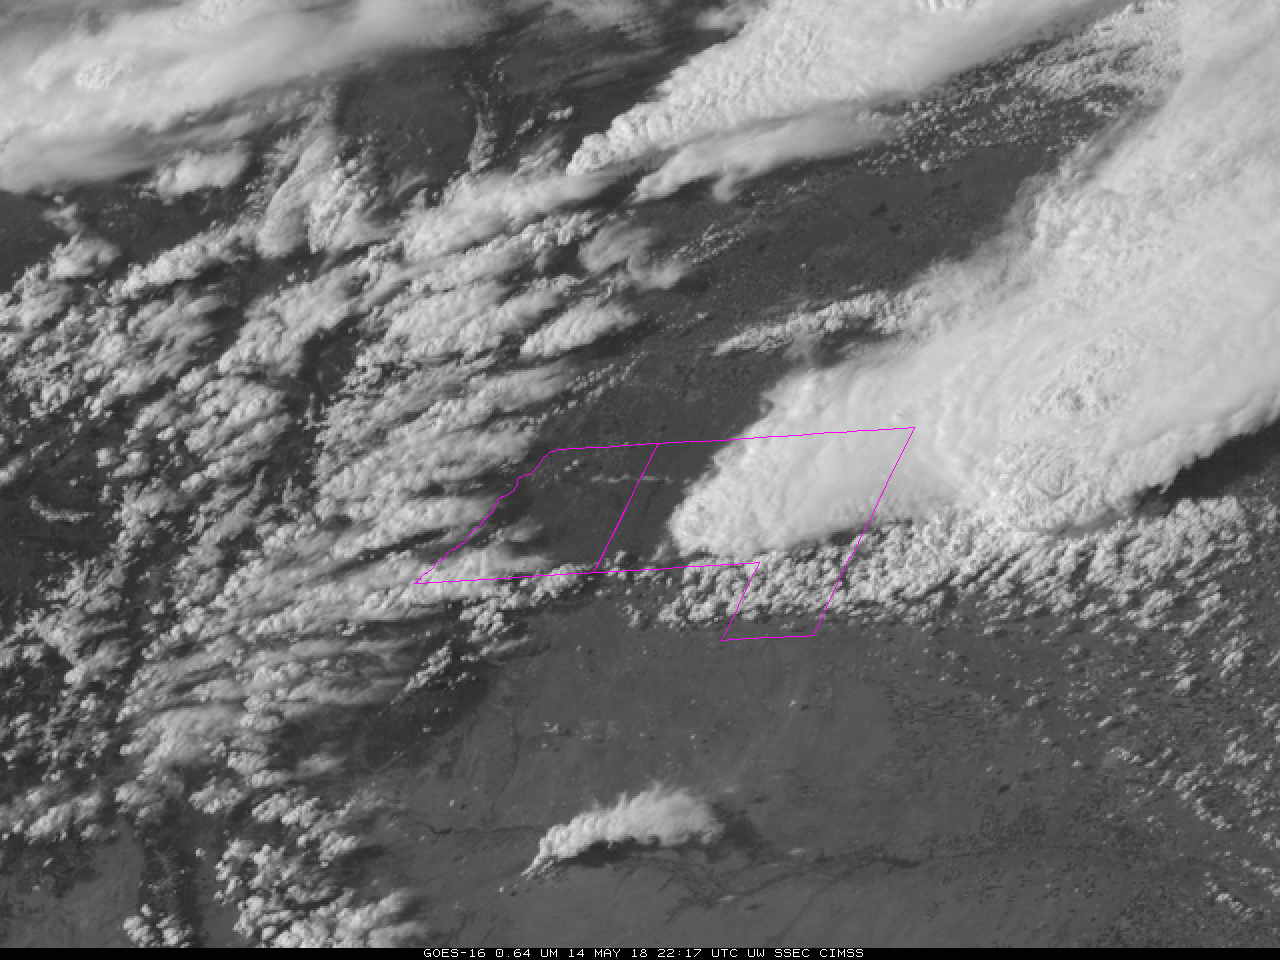 GOES-16 Band 2 (“Red Visible”, 0.64 µm) and Band 5 (“Snow/Ice”, 1.61 µm) imagery at 2217 UTC on 15 May 2018 showing hail on the ground in Douglas and Elbert counties, Colorado (Click to enlarge)